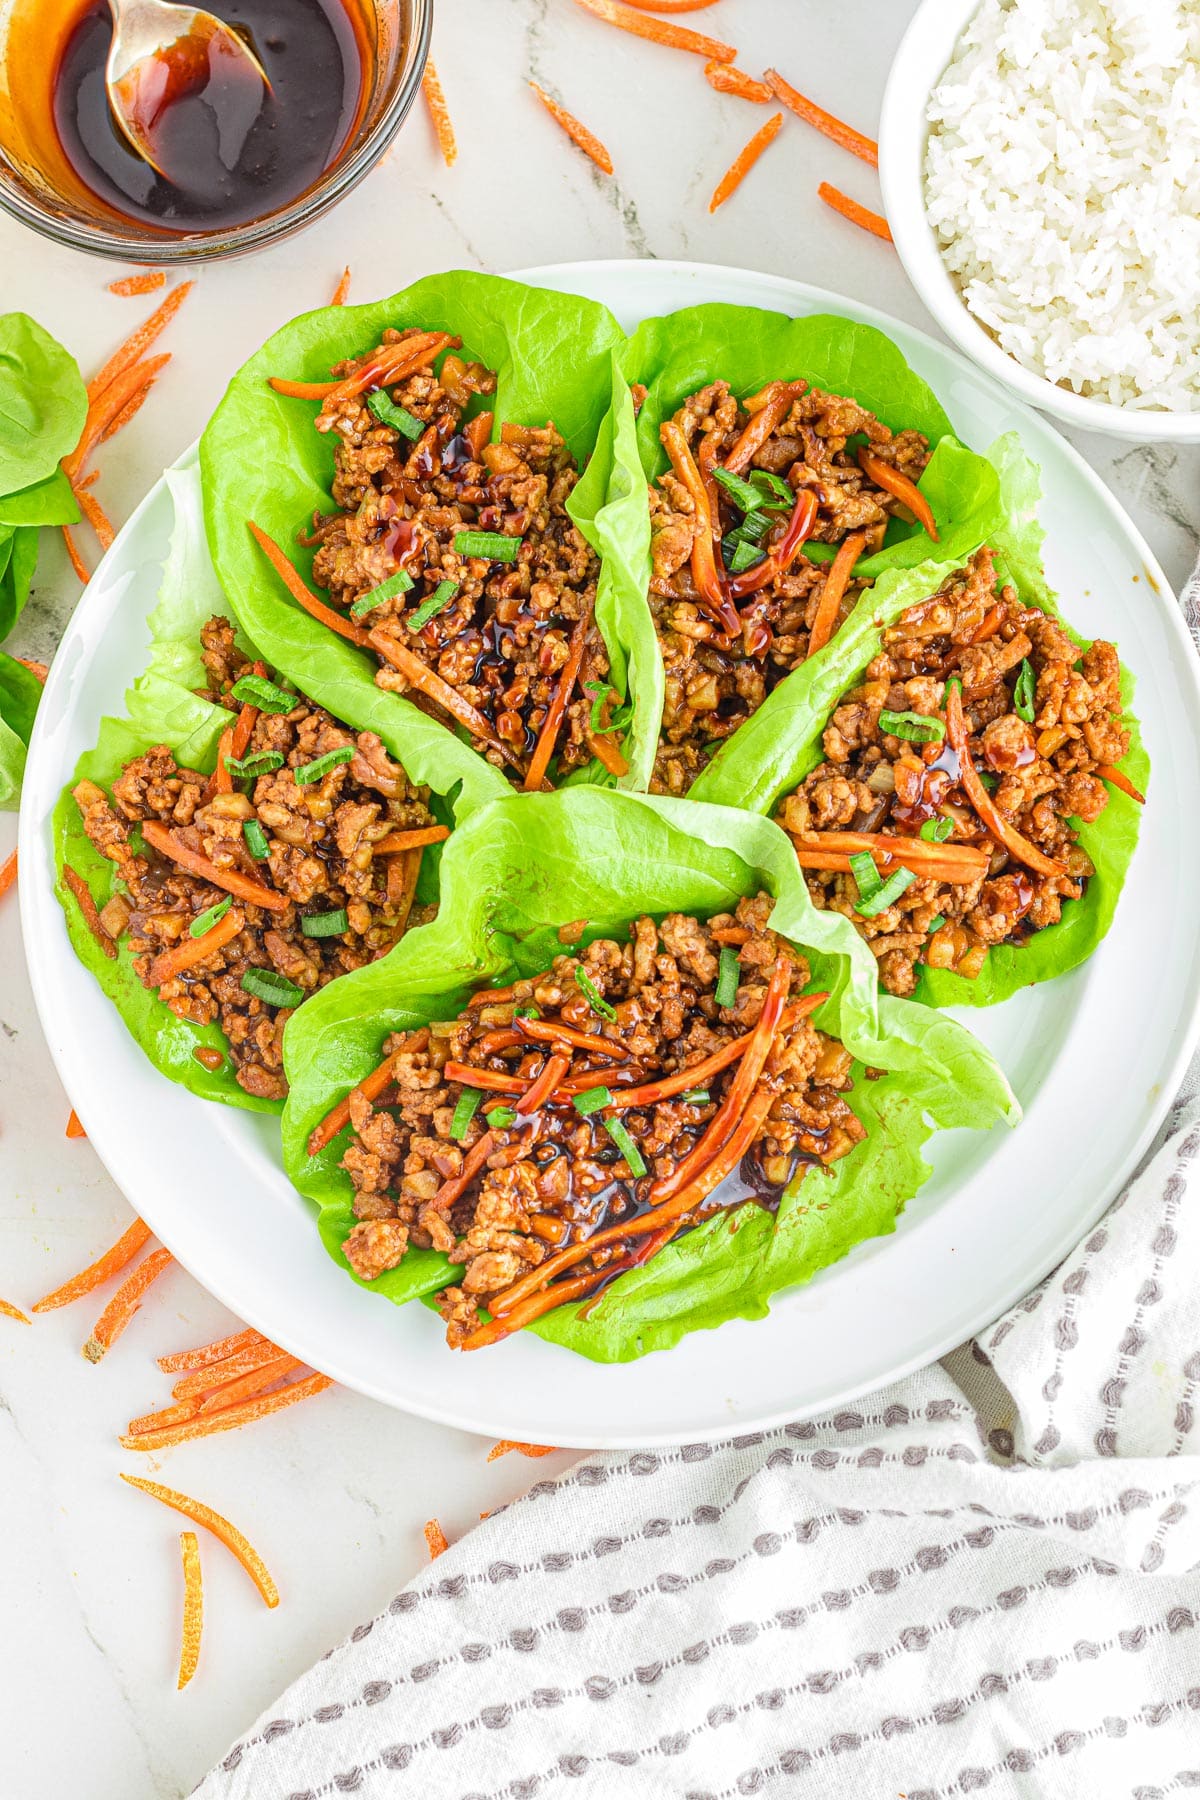 Pork lettuce wraps filled with seasoned ground meat and carrots being served on a platter with more sauce and white rice in a bowl nearby.